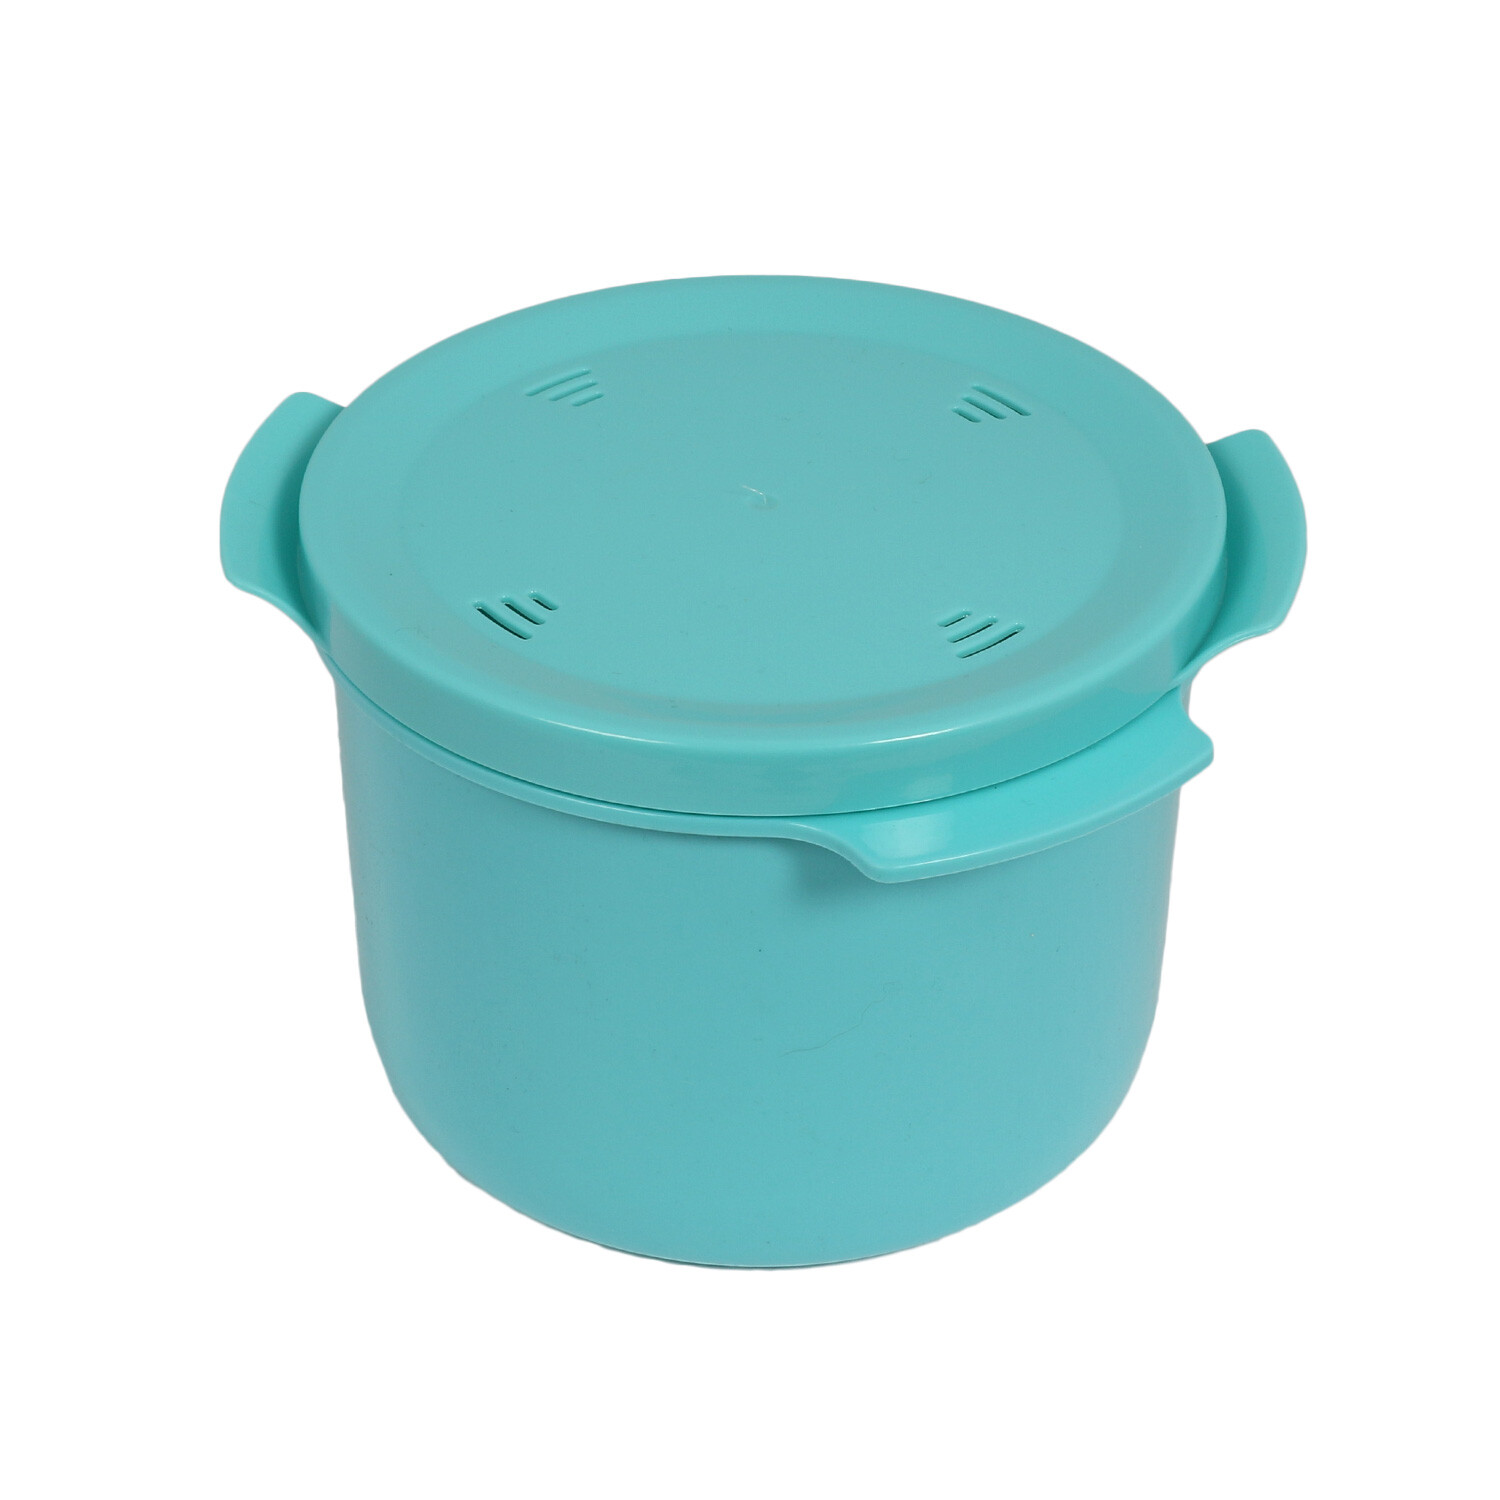 Microwave 1 Portion Rice Cooker - Blue Image